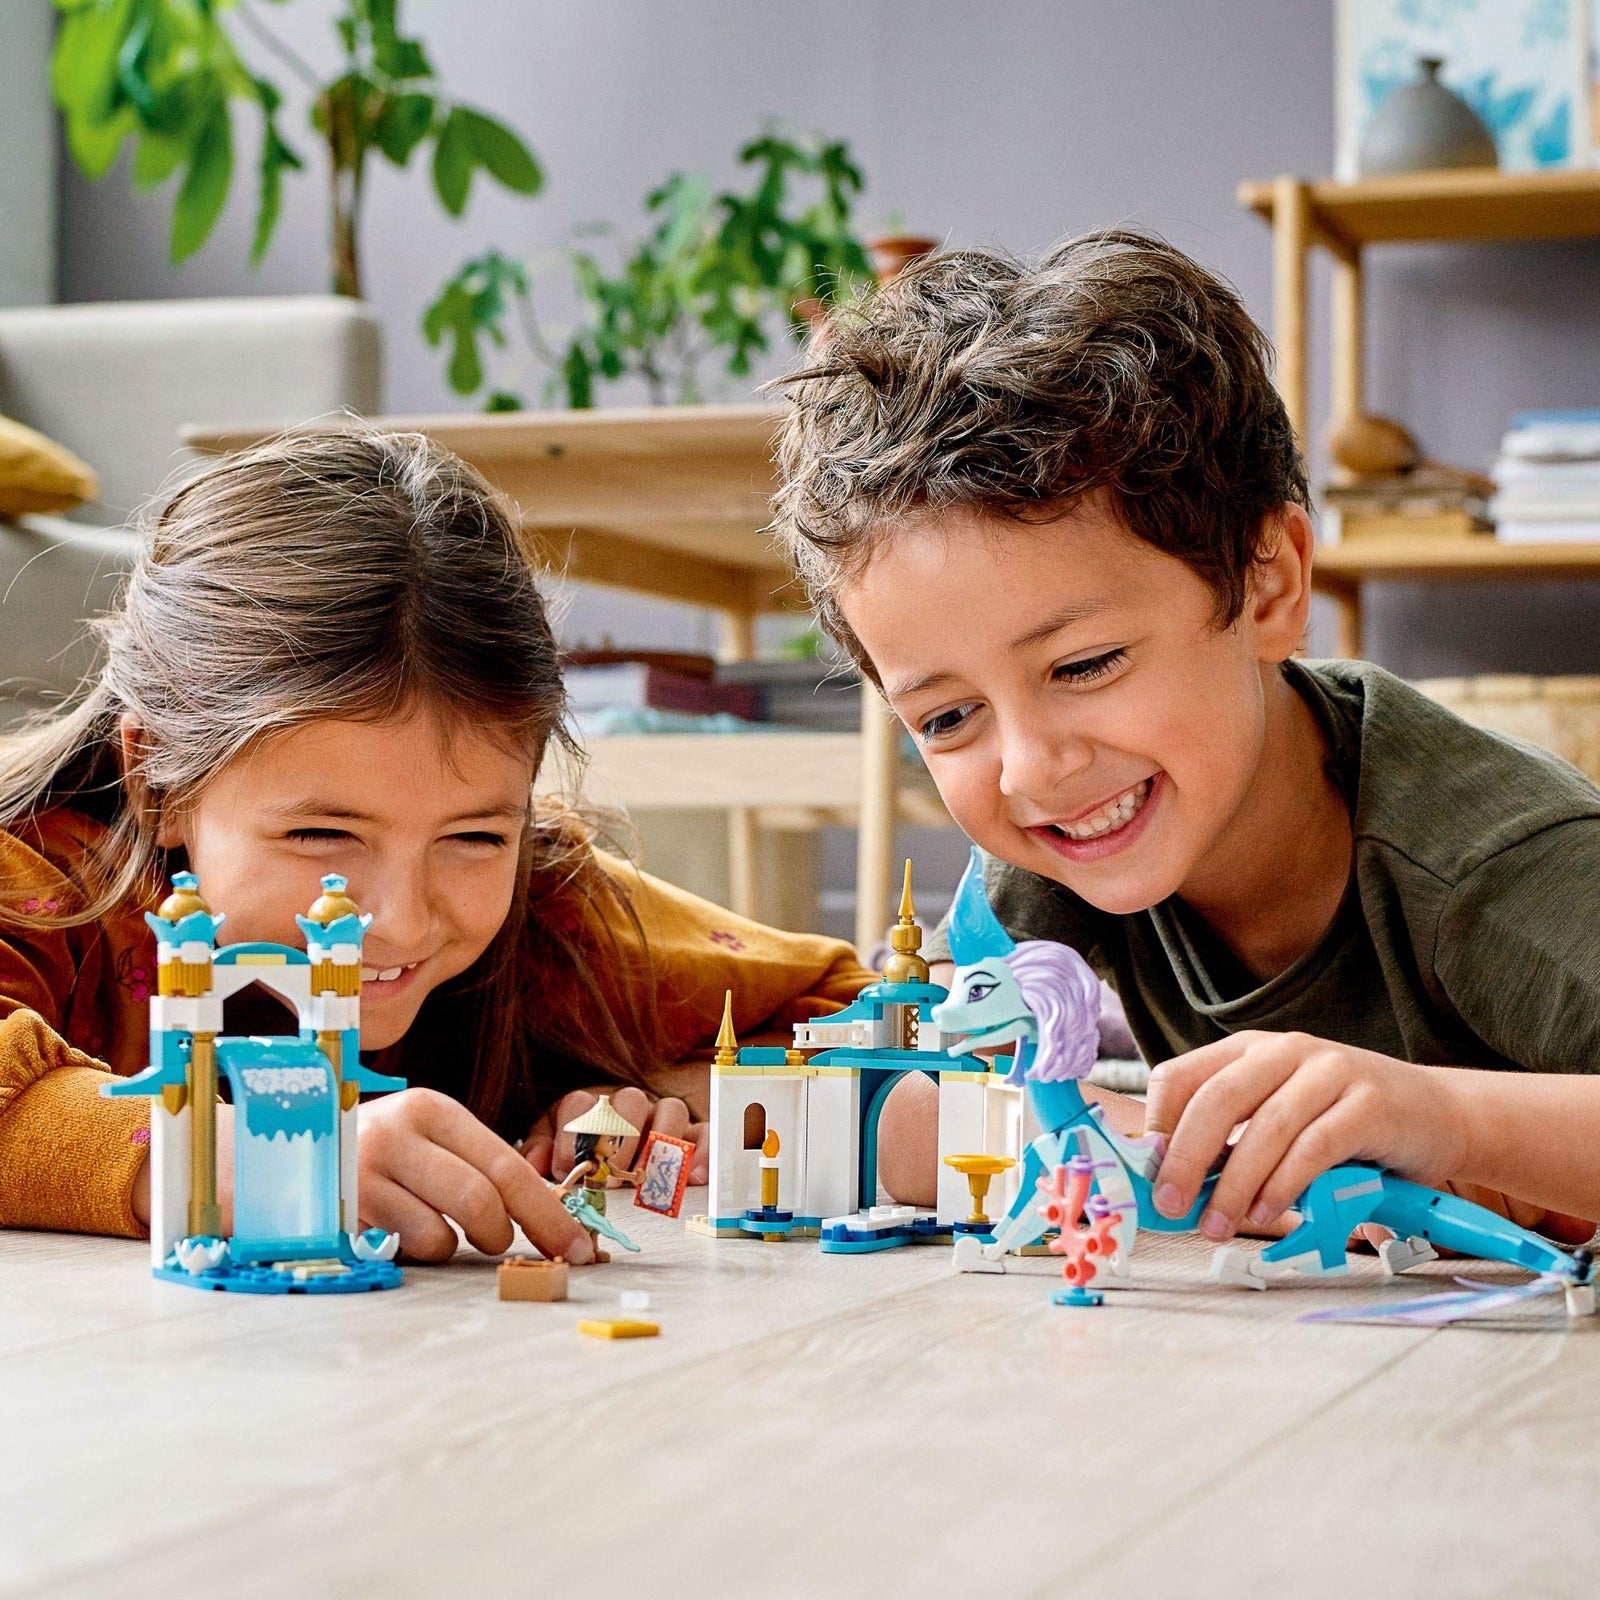 LEGO Disney Raya and Sisu Dragon 43184; A Unique Toy and Building Kit; Best for Kids Who Like Stories with Dragons and Adventuring with Strong Disney Characters, New 2021 (216 Pieces)